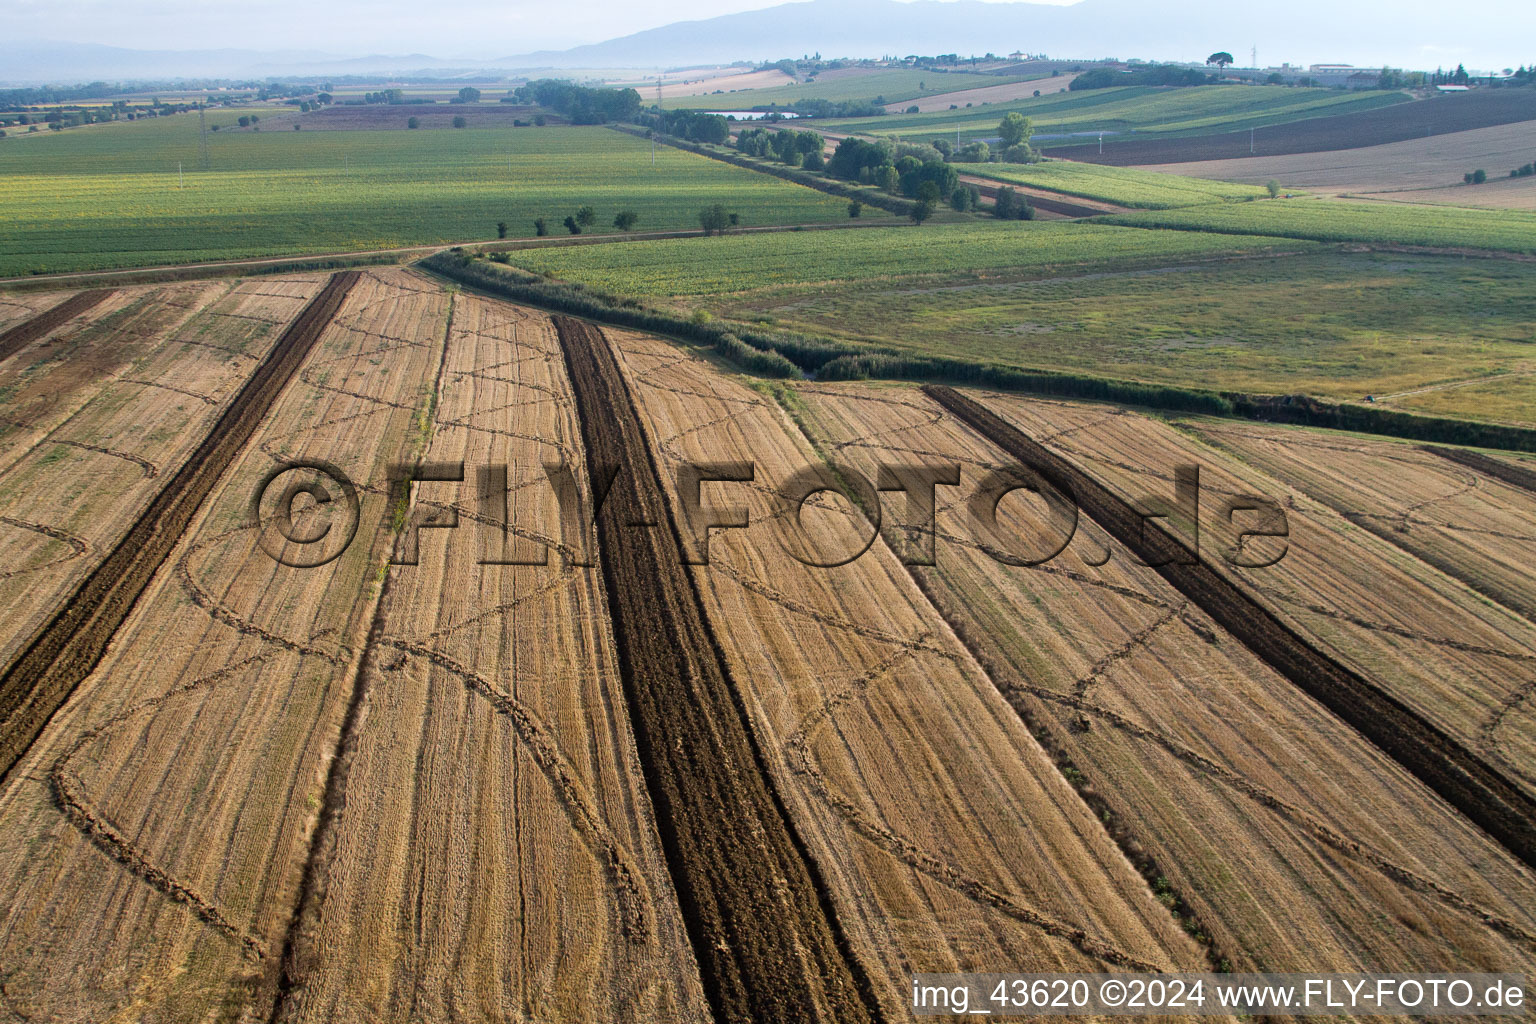 Aerial view of Field structures of a harvested grain field in Anatraia in Toscana, Italy